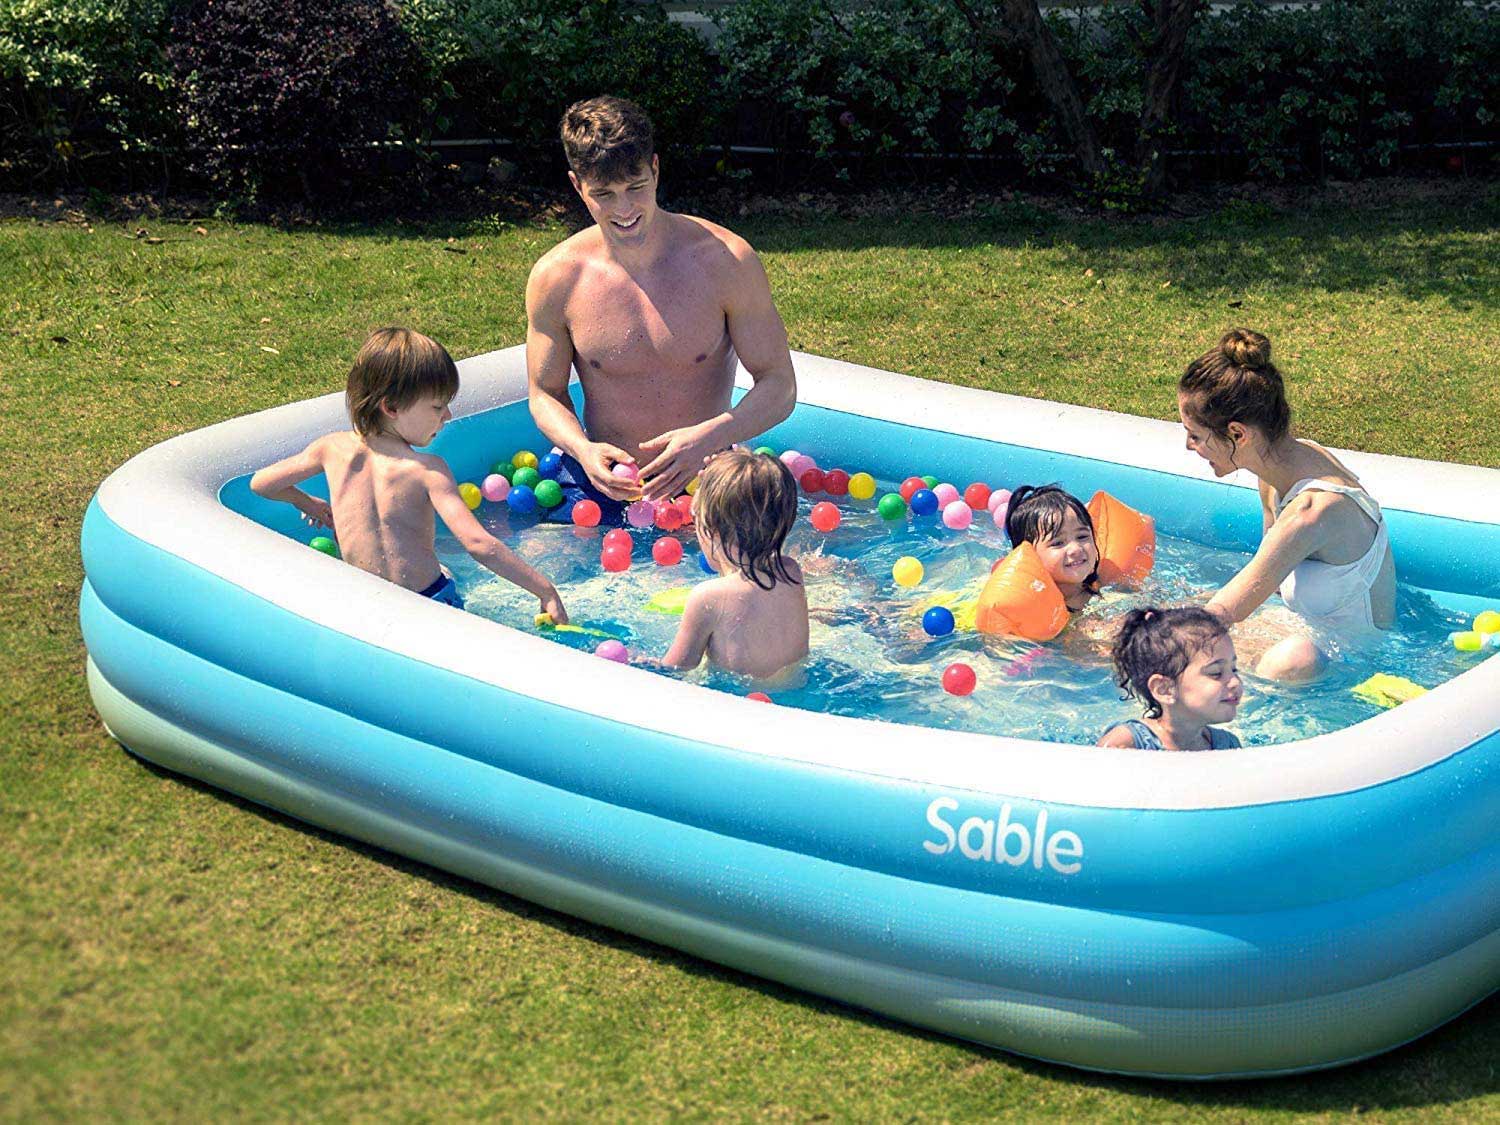 Sable Inflatable Pool, Blow Up Family Full-Sized Pool for Kids, Toddlers, Infant & Adult, 118